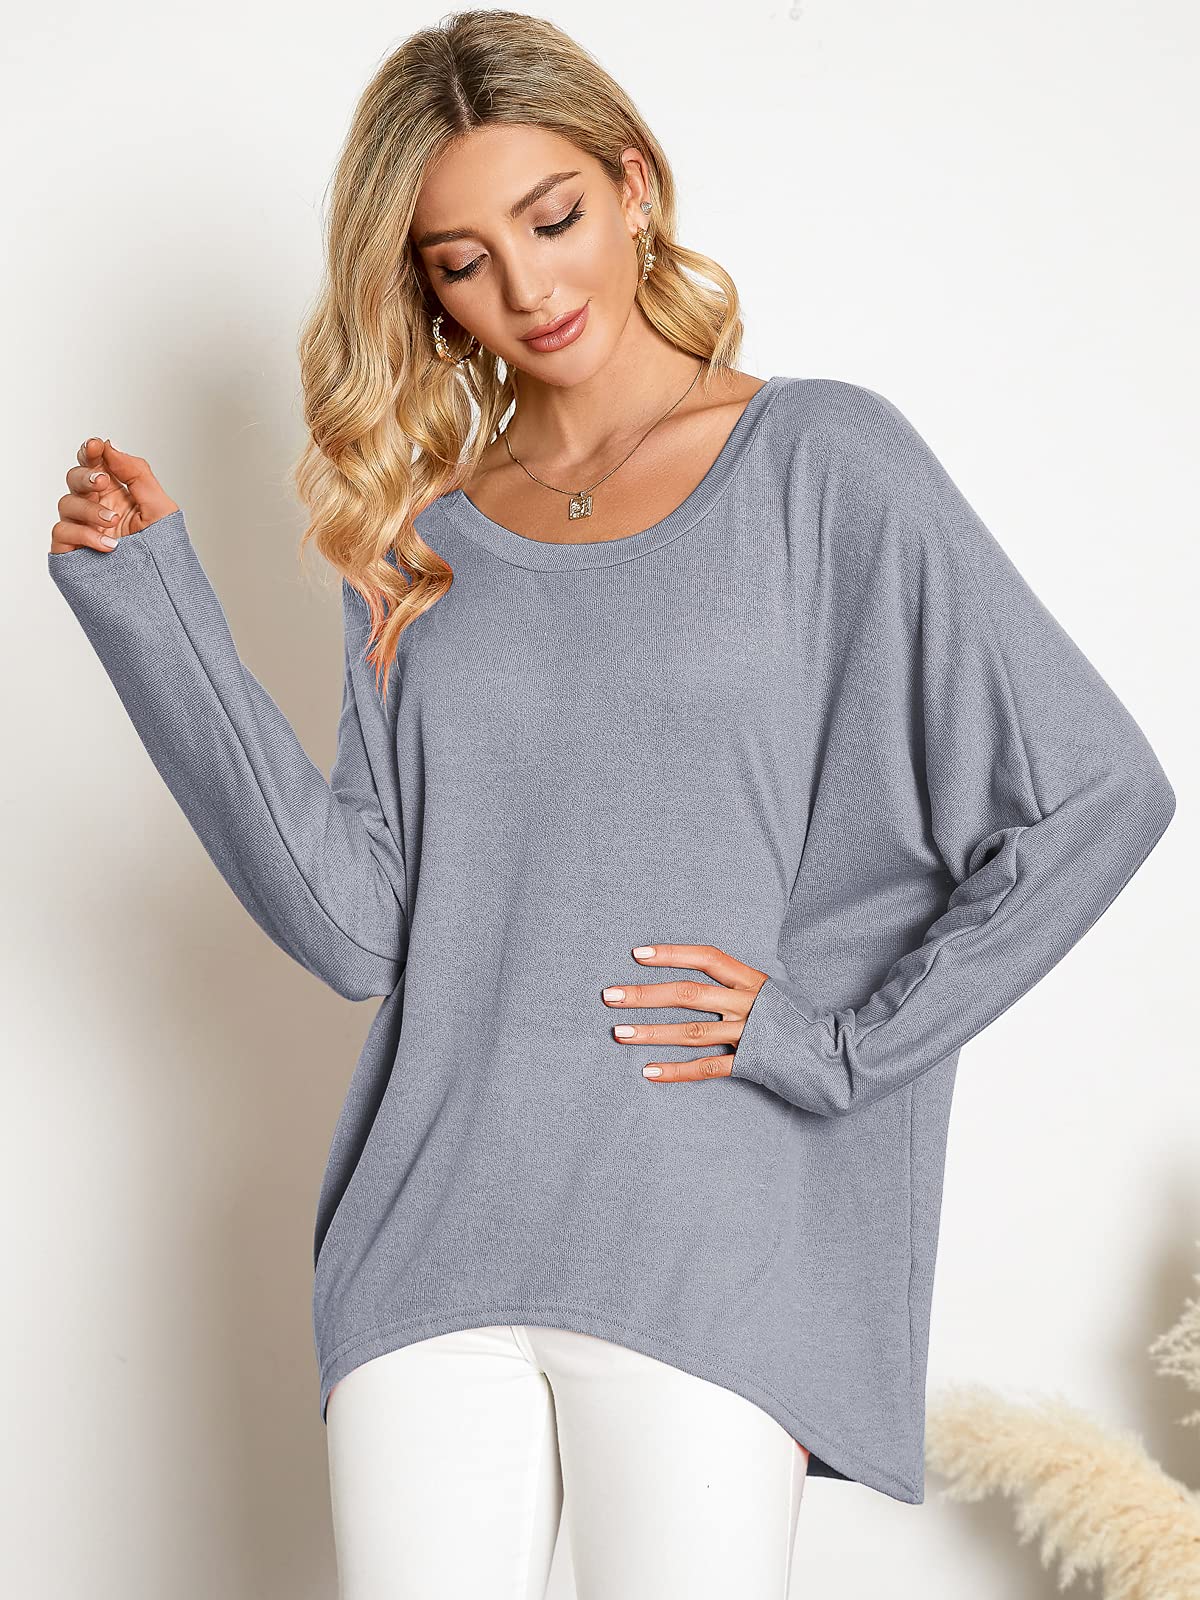 ZANZEA Women's Off-Shoulder Batwing Sleeve Blouse Casual Loose Oversized Baggy T-Shirt Sweater Pullover Top